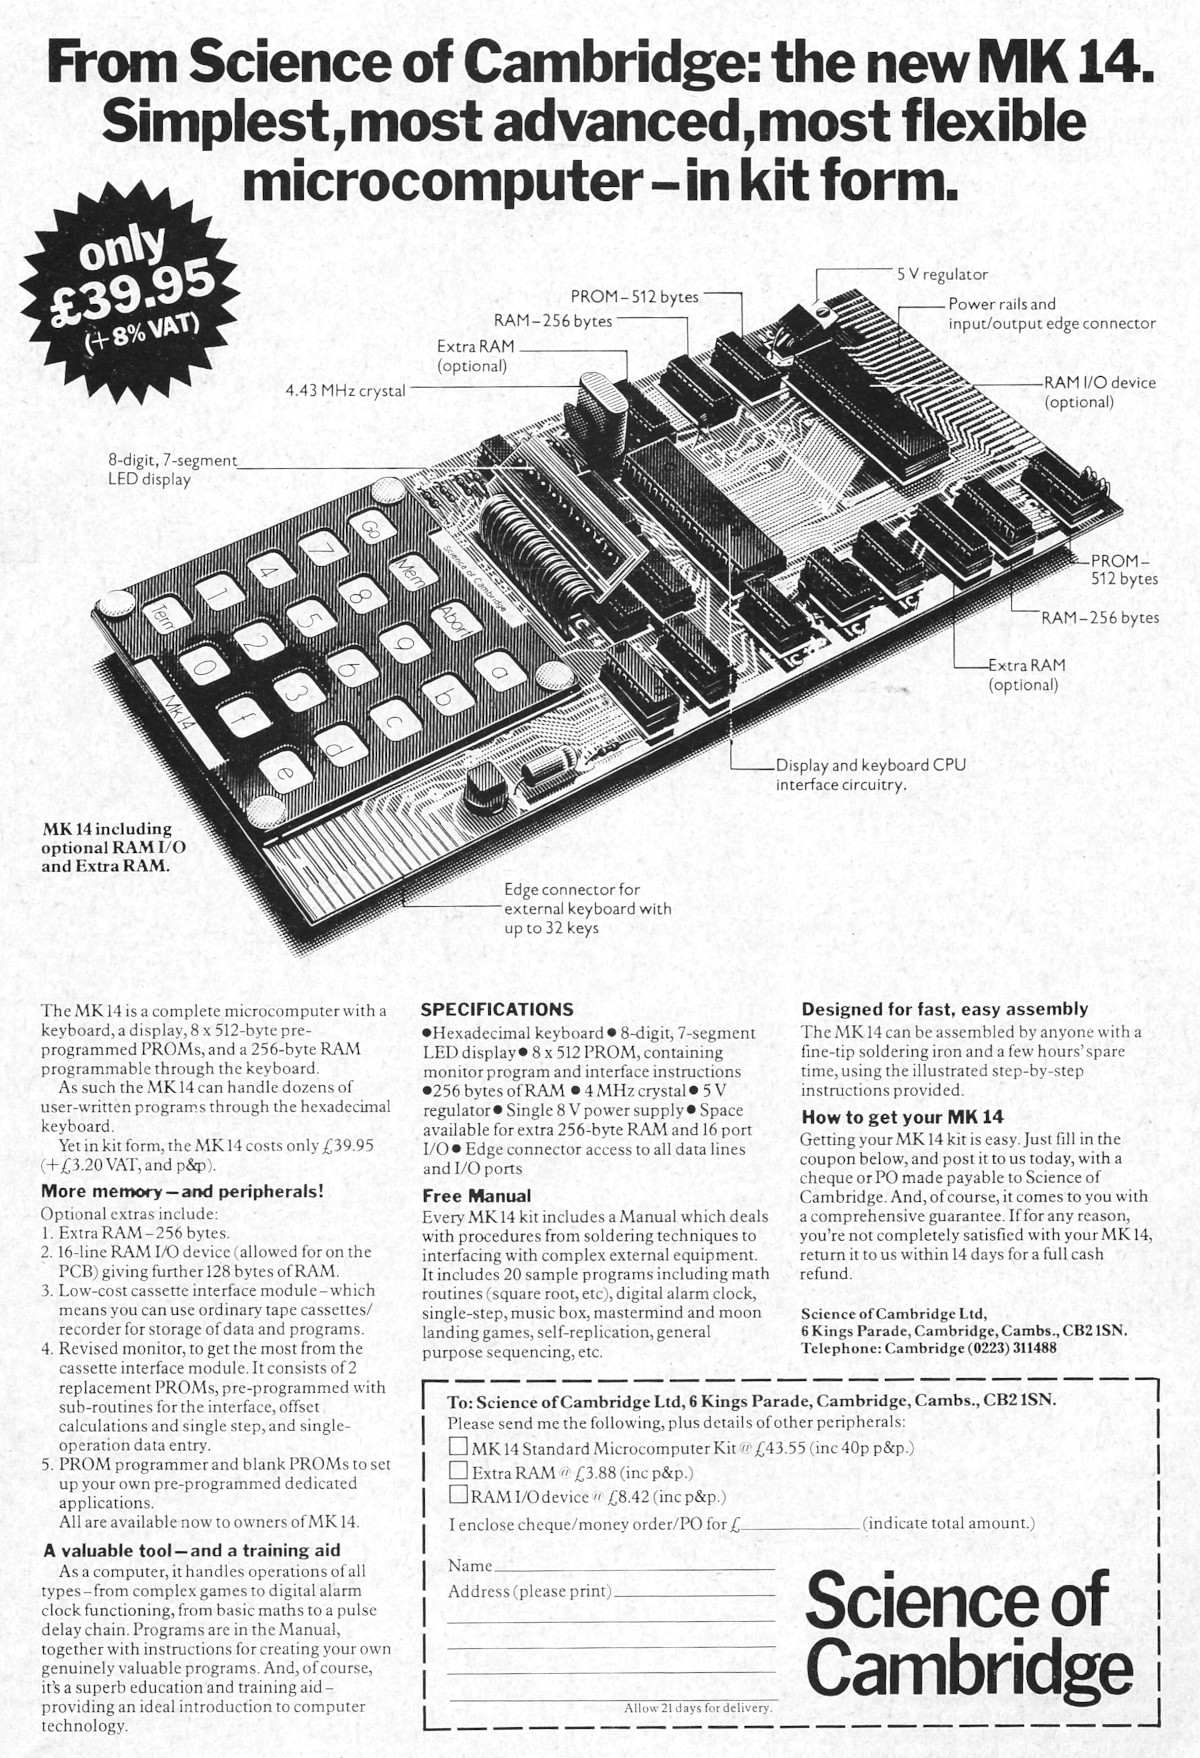 An updated advert from a couple of months later, s<span class='hilite'>how</span>ing an actual product MK14. From Personal Computer World, December 1978